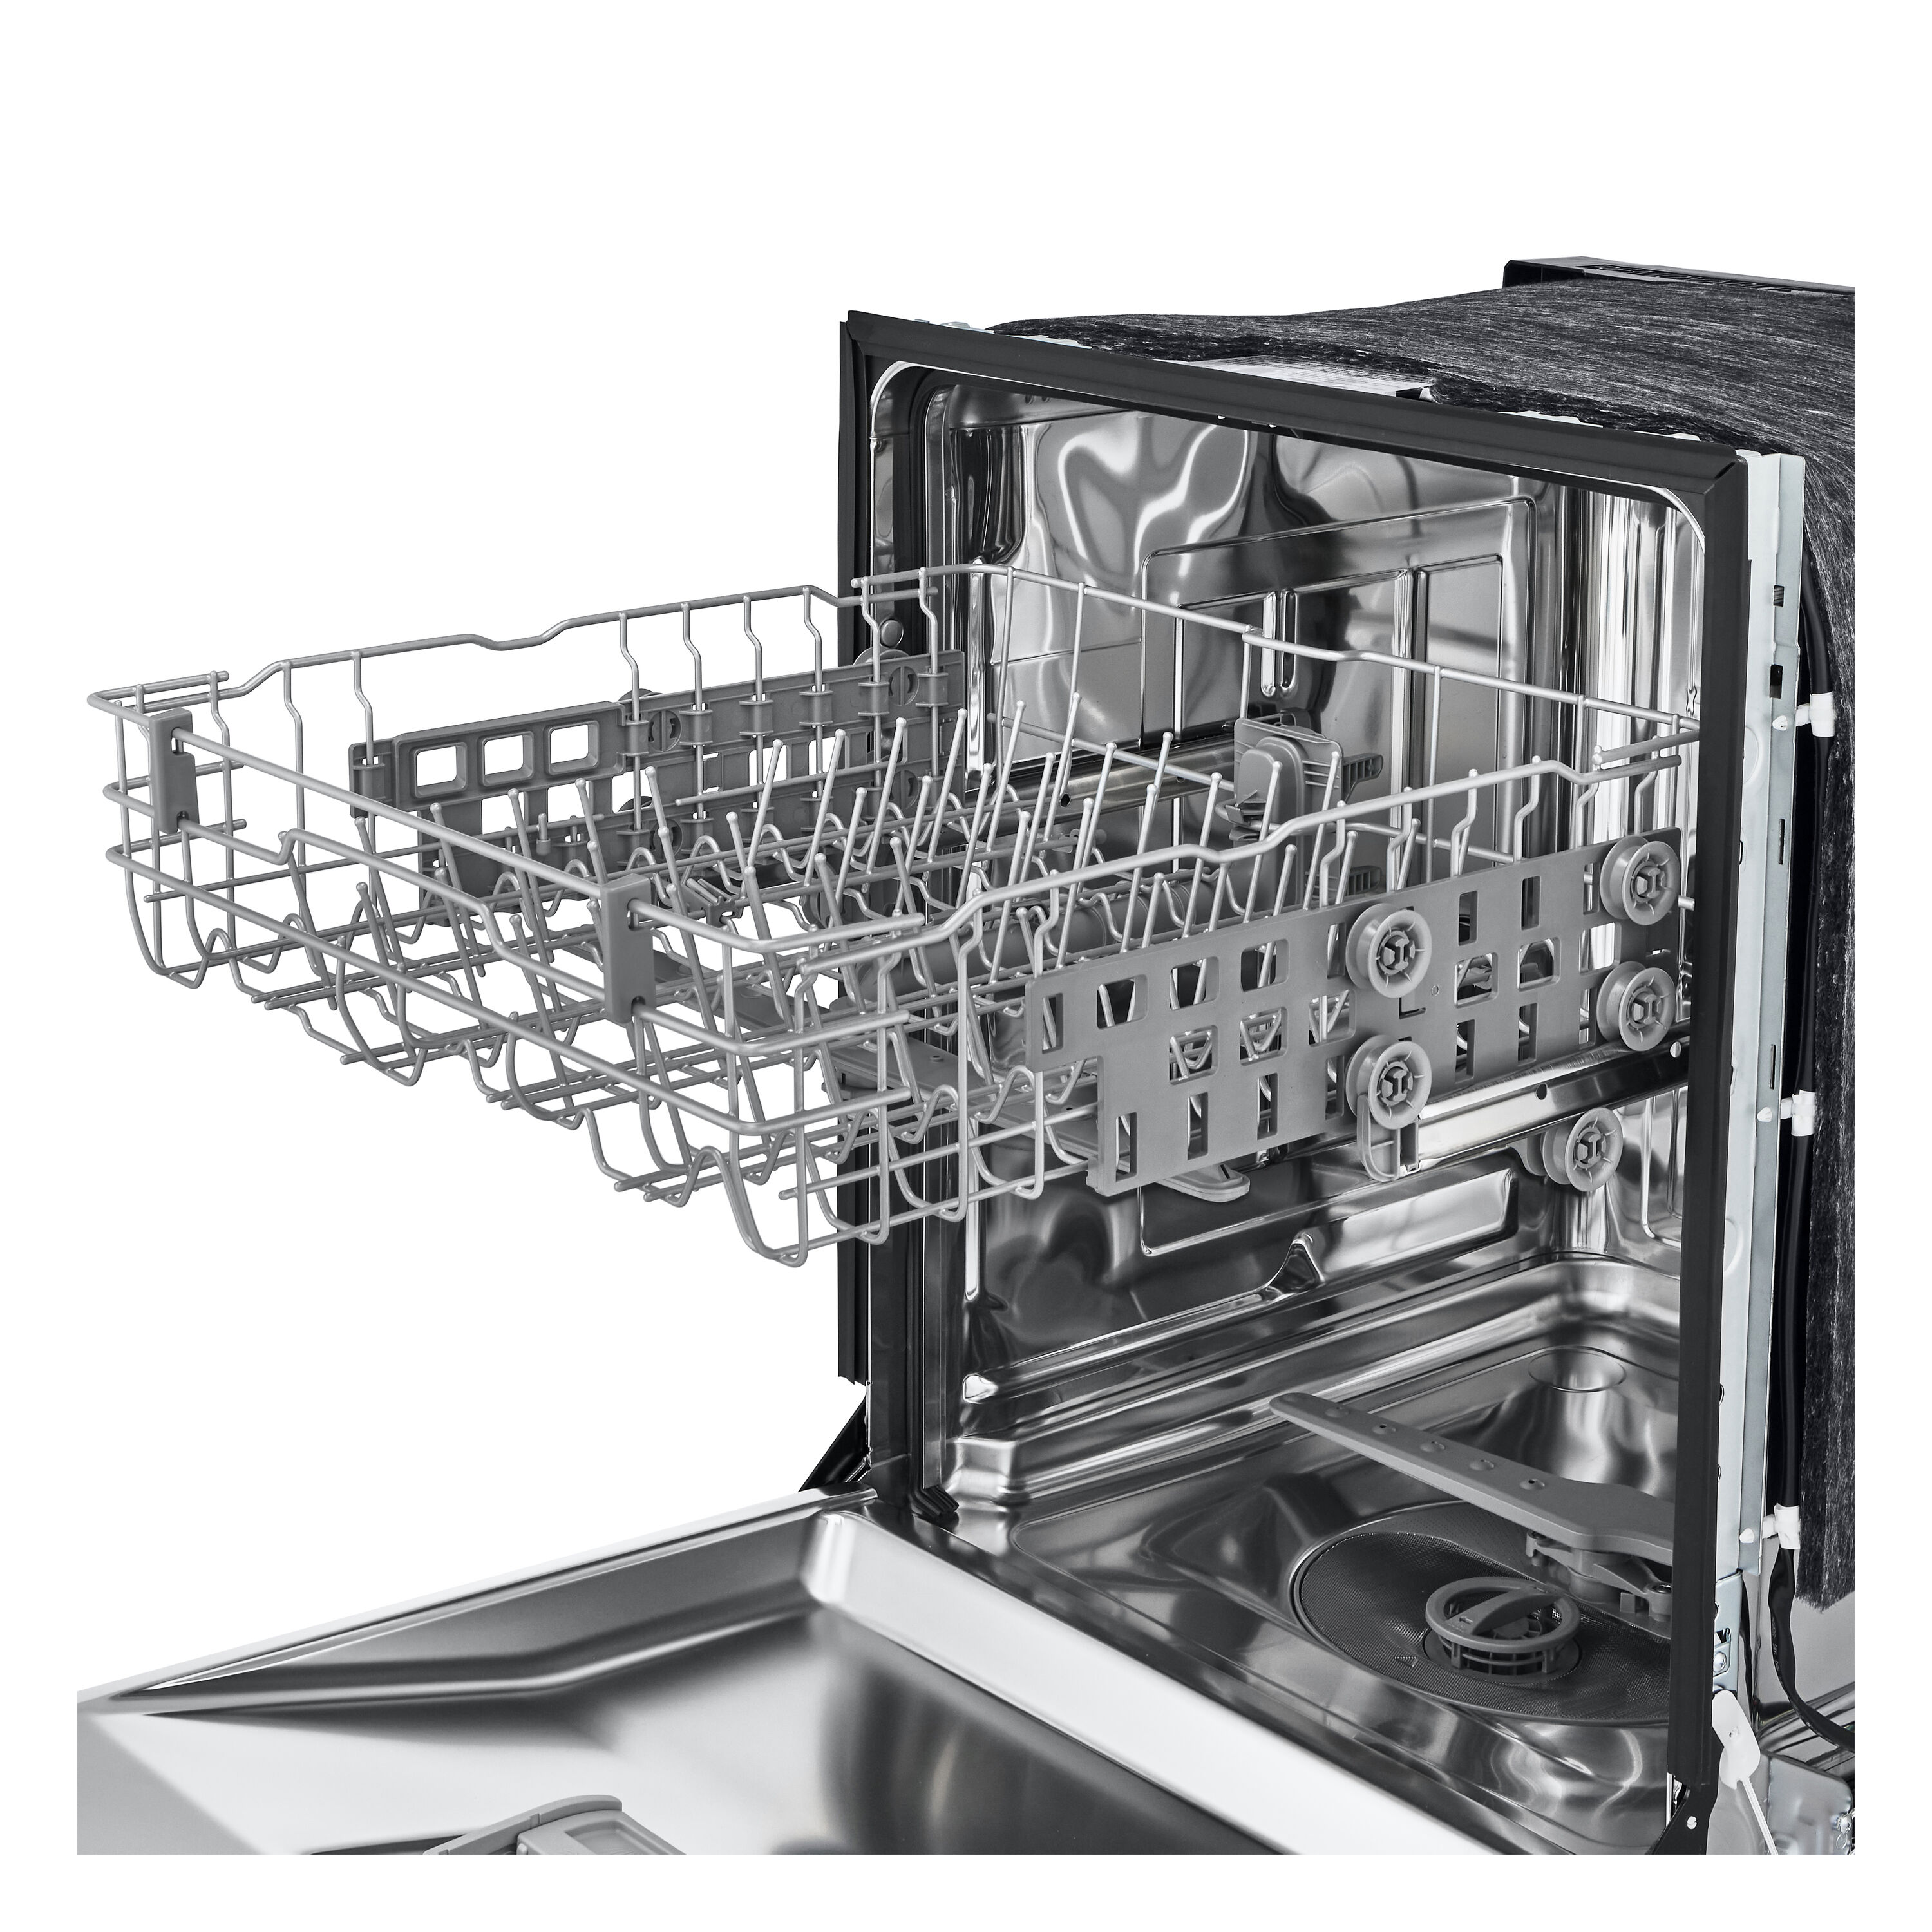 LG 24 in. Stainless Look Front Control Dishwasher with Stainless Steel Tub  and SenseClean LDFC2423V - The Home Depot